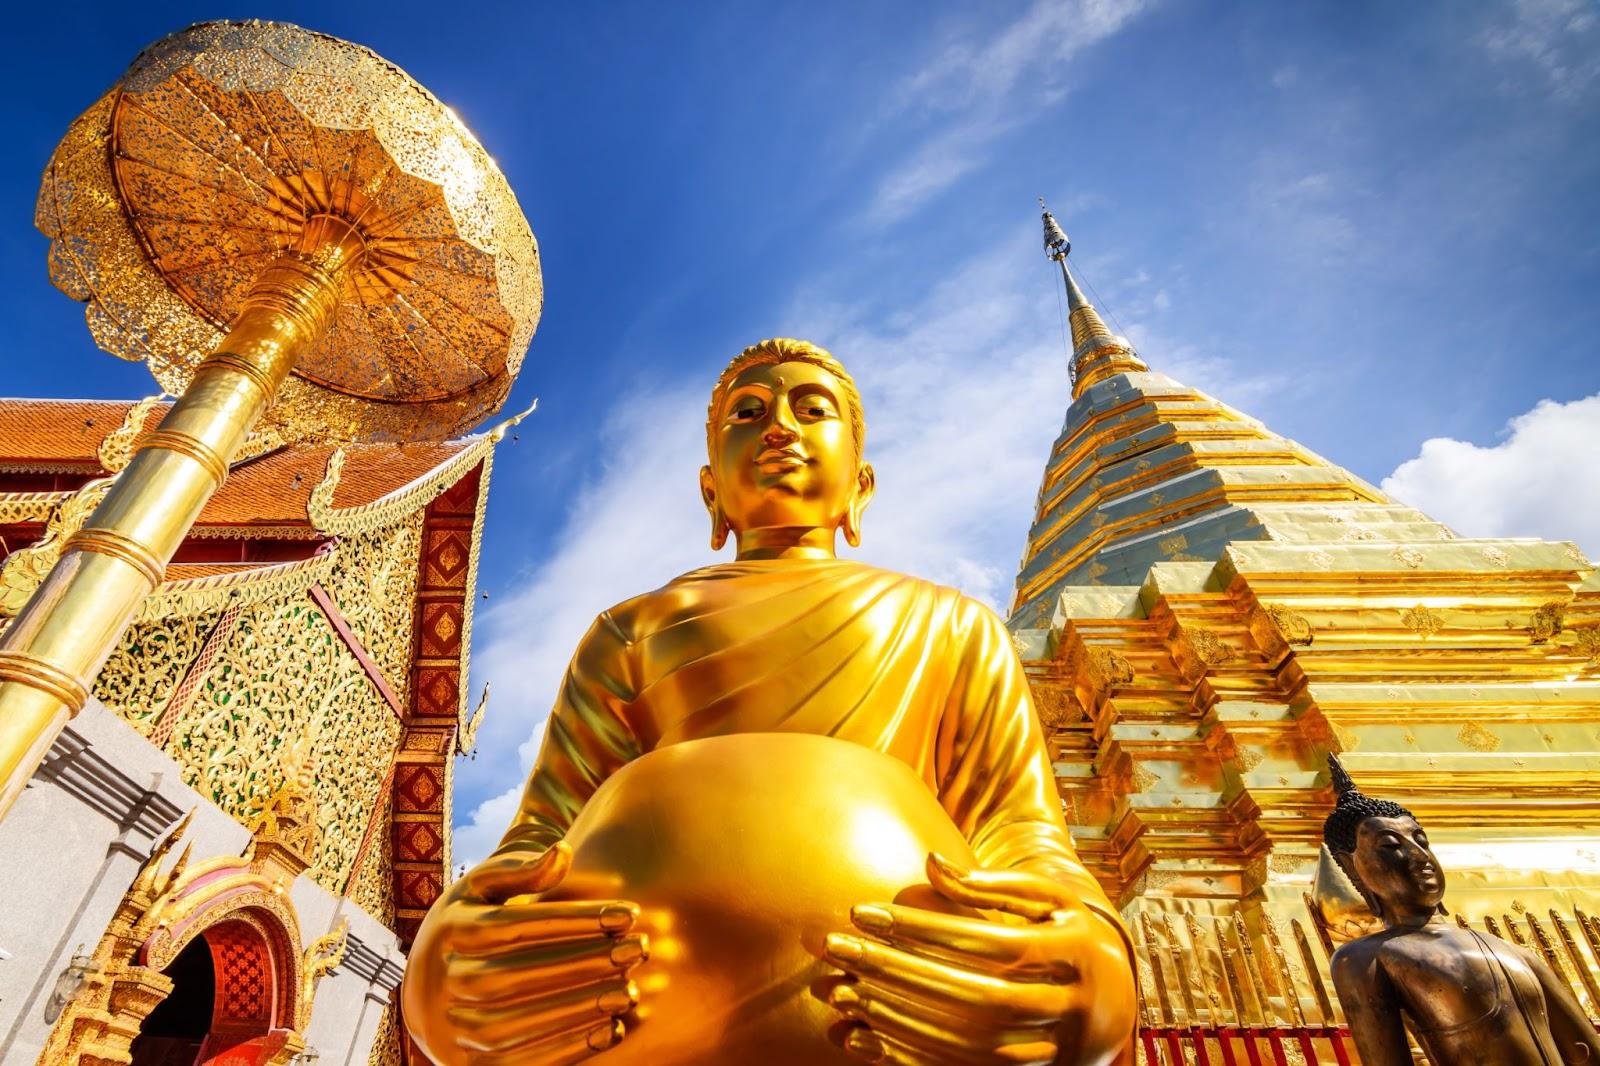 Wat Phra That Doi Suthep is tourist attraction of Chiang Mai, Thailand.Asia